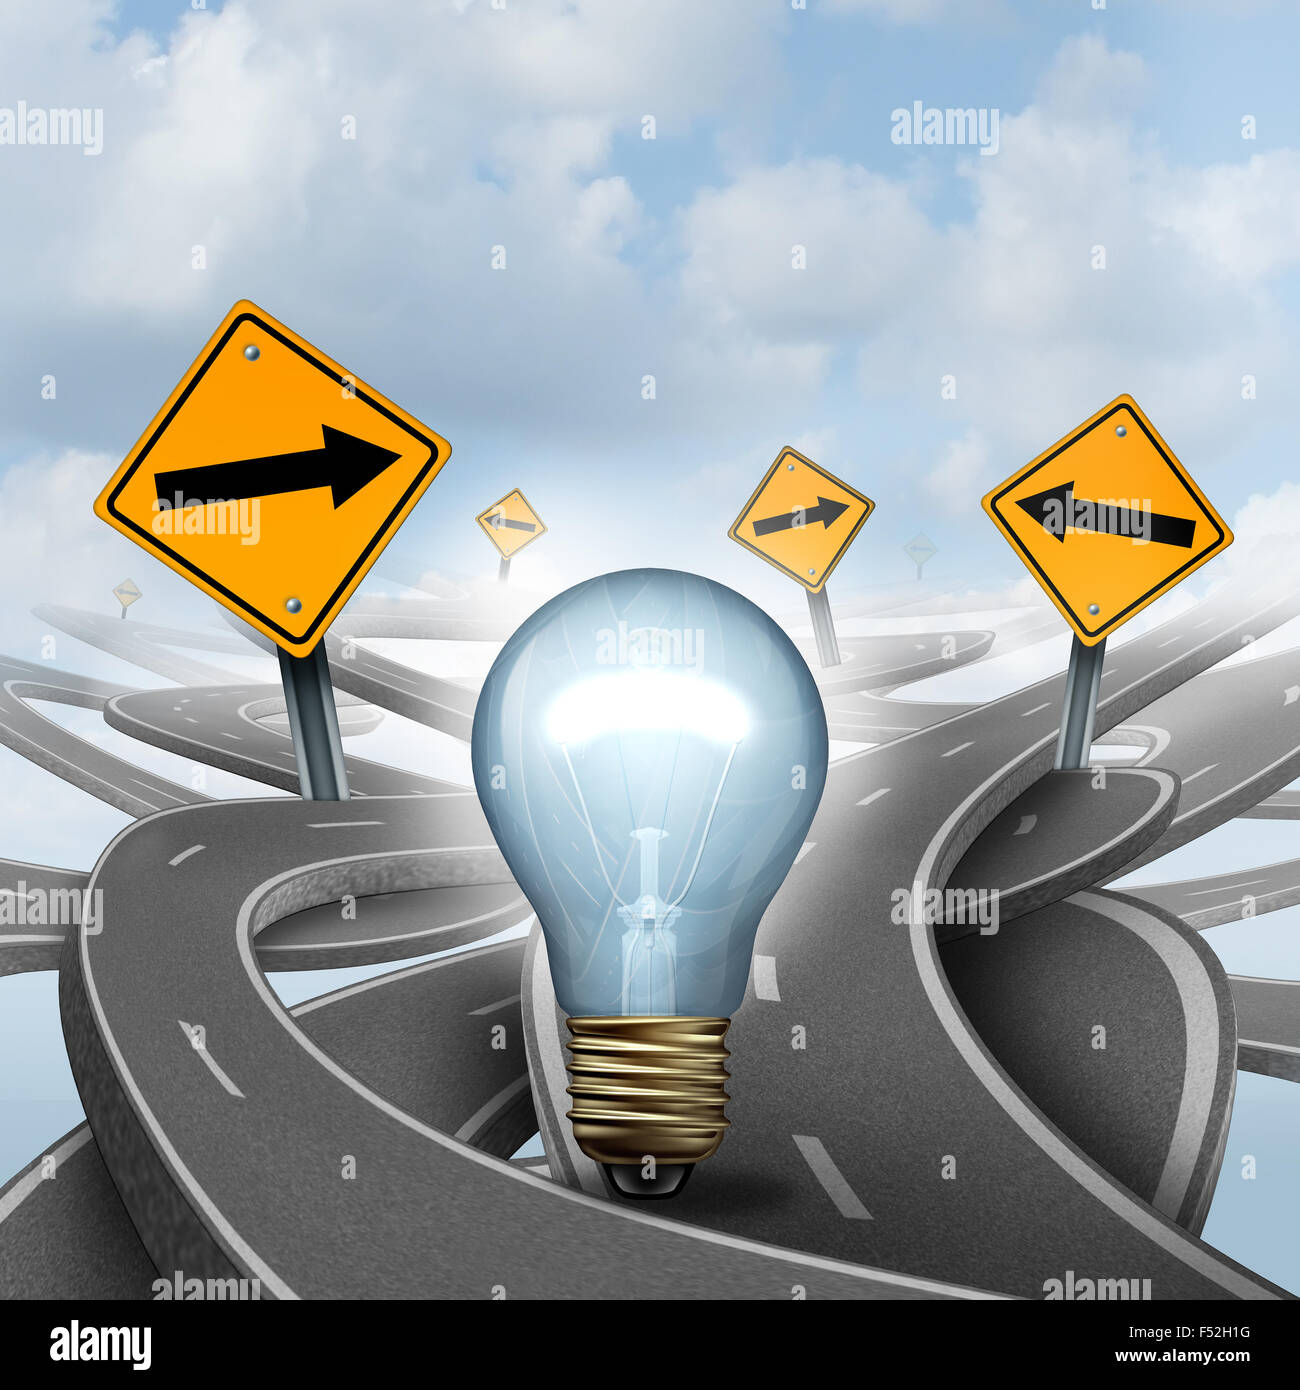 Strategic Ideas concept as a business symbol with a lightbulb or light bulb choosing the right strategic path for a new creative way with yellow traffic signs arrows and tangled roads and highways in a confused direction. Stock Photo